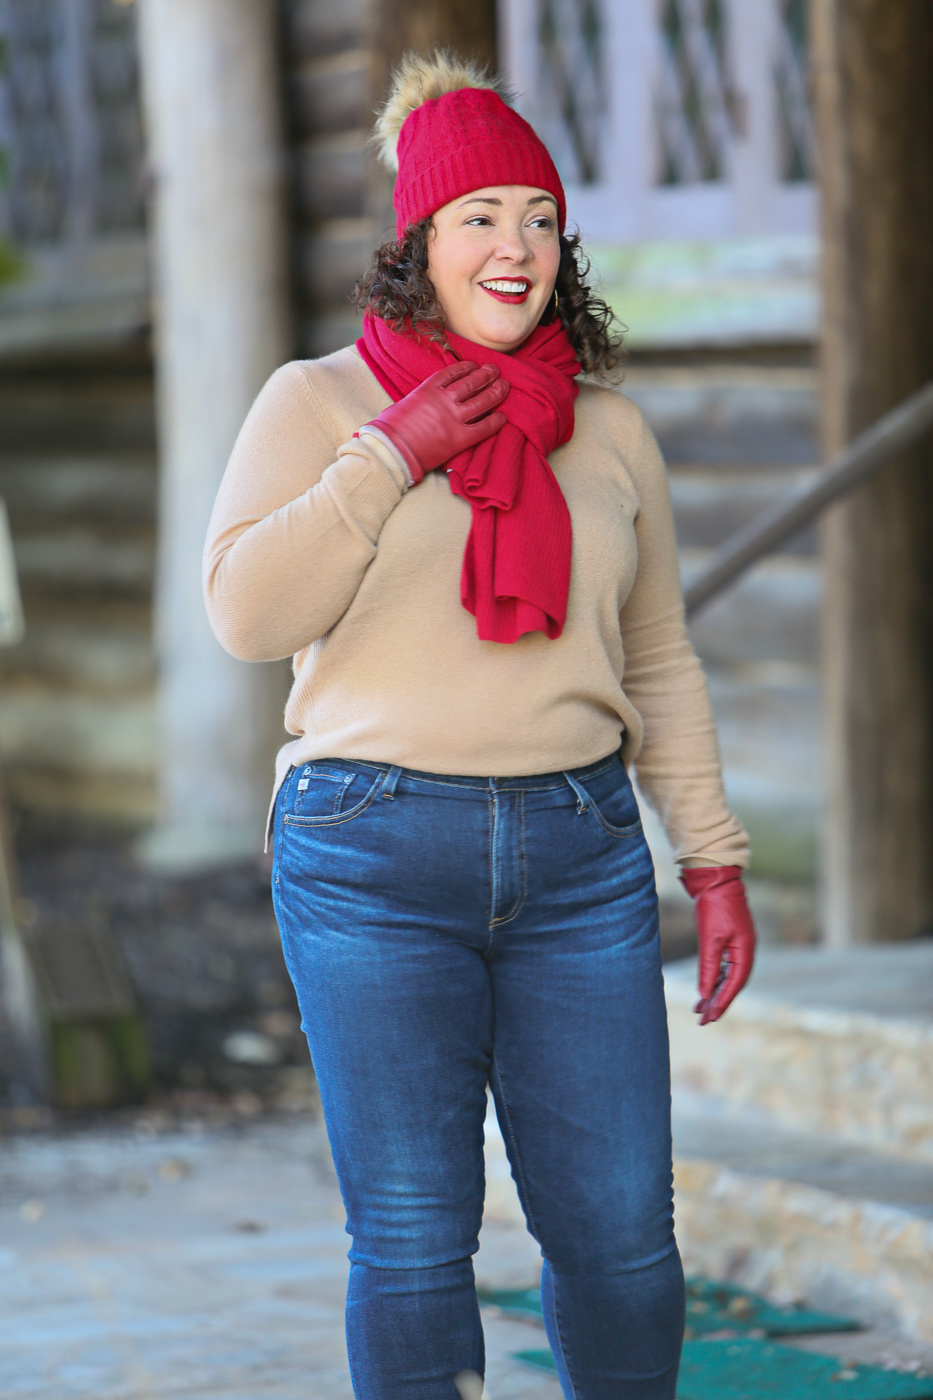 Woman in cream sweater, red scarf and hat and gloves smiling and looking away